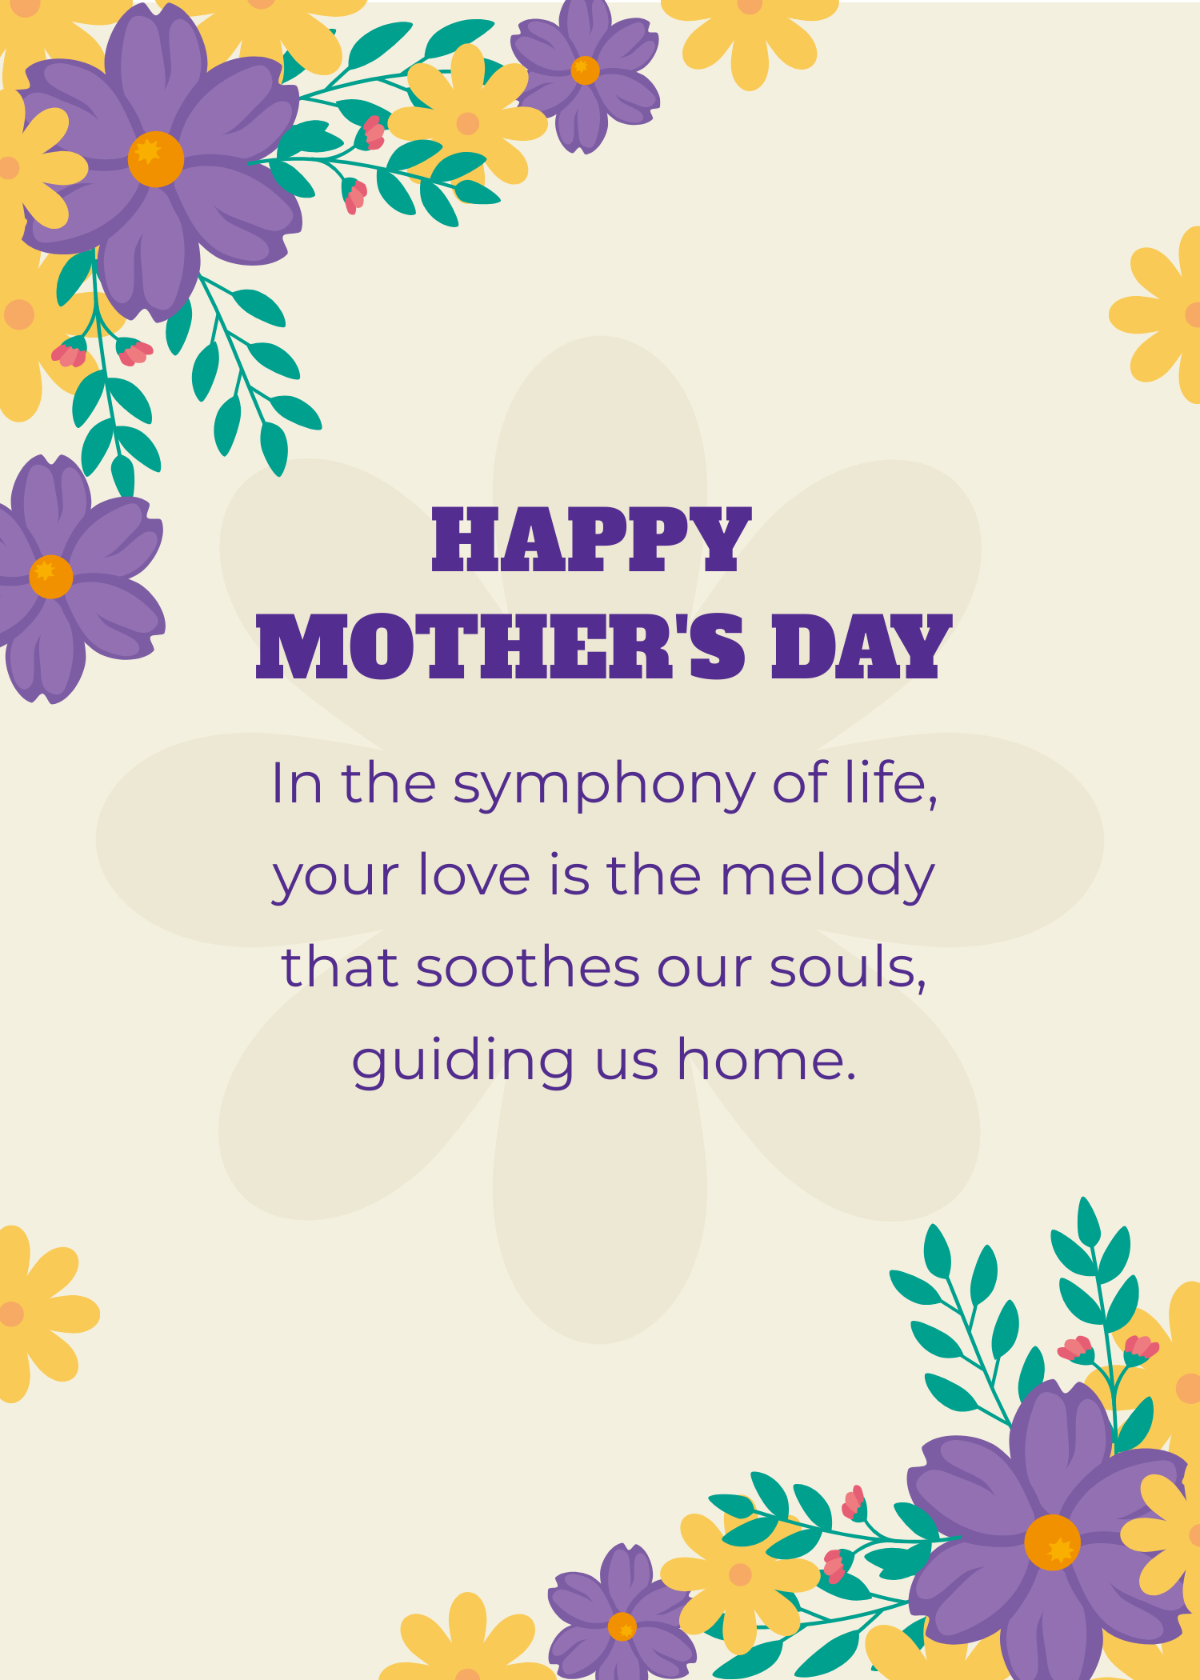 Mother's Day Greeting Message